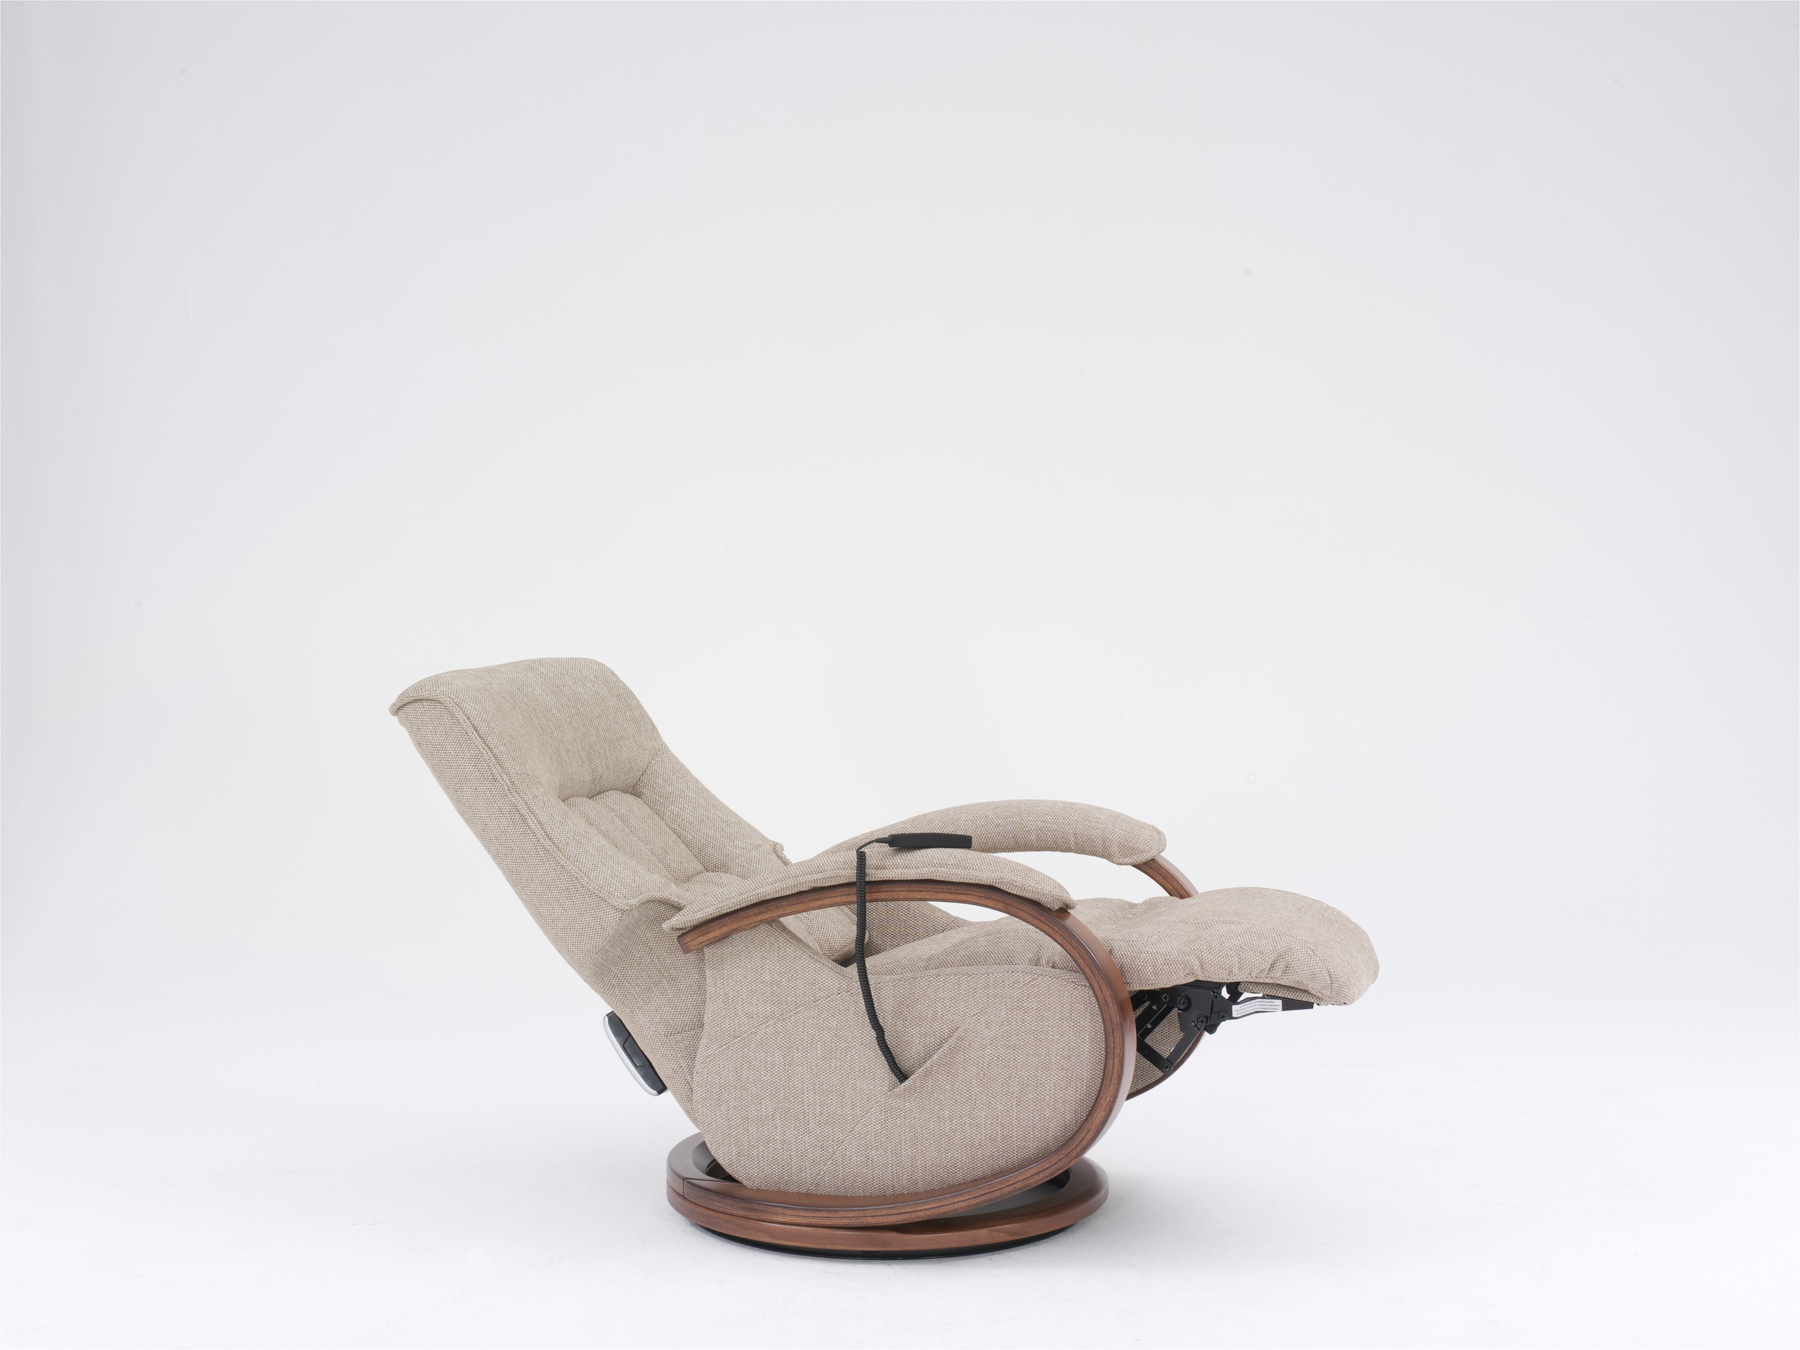 HIMOLLA MOSEL FABRIC CHAIR FULLY RECLINED